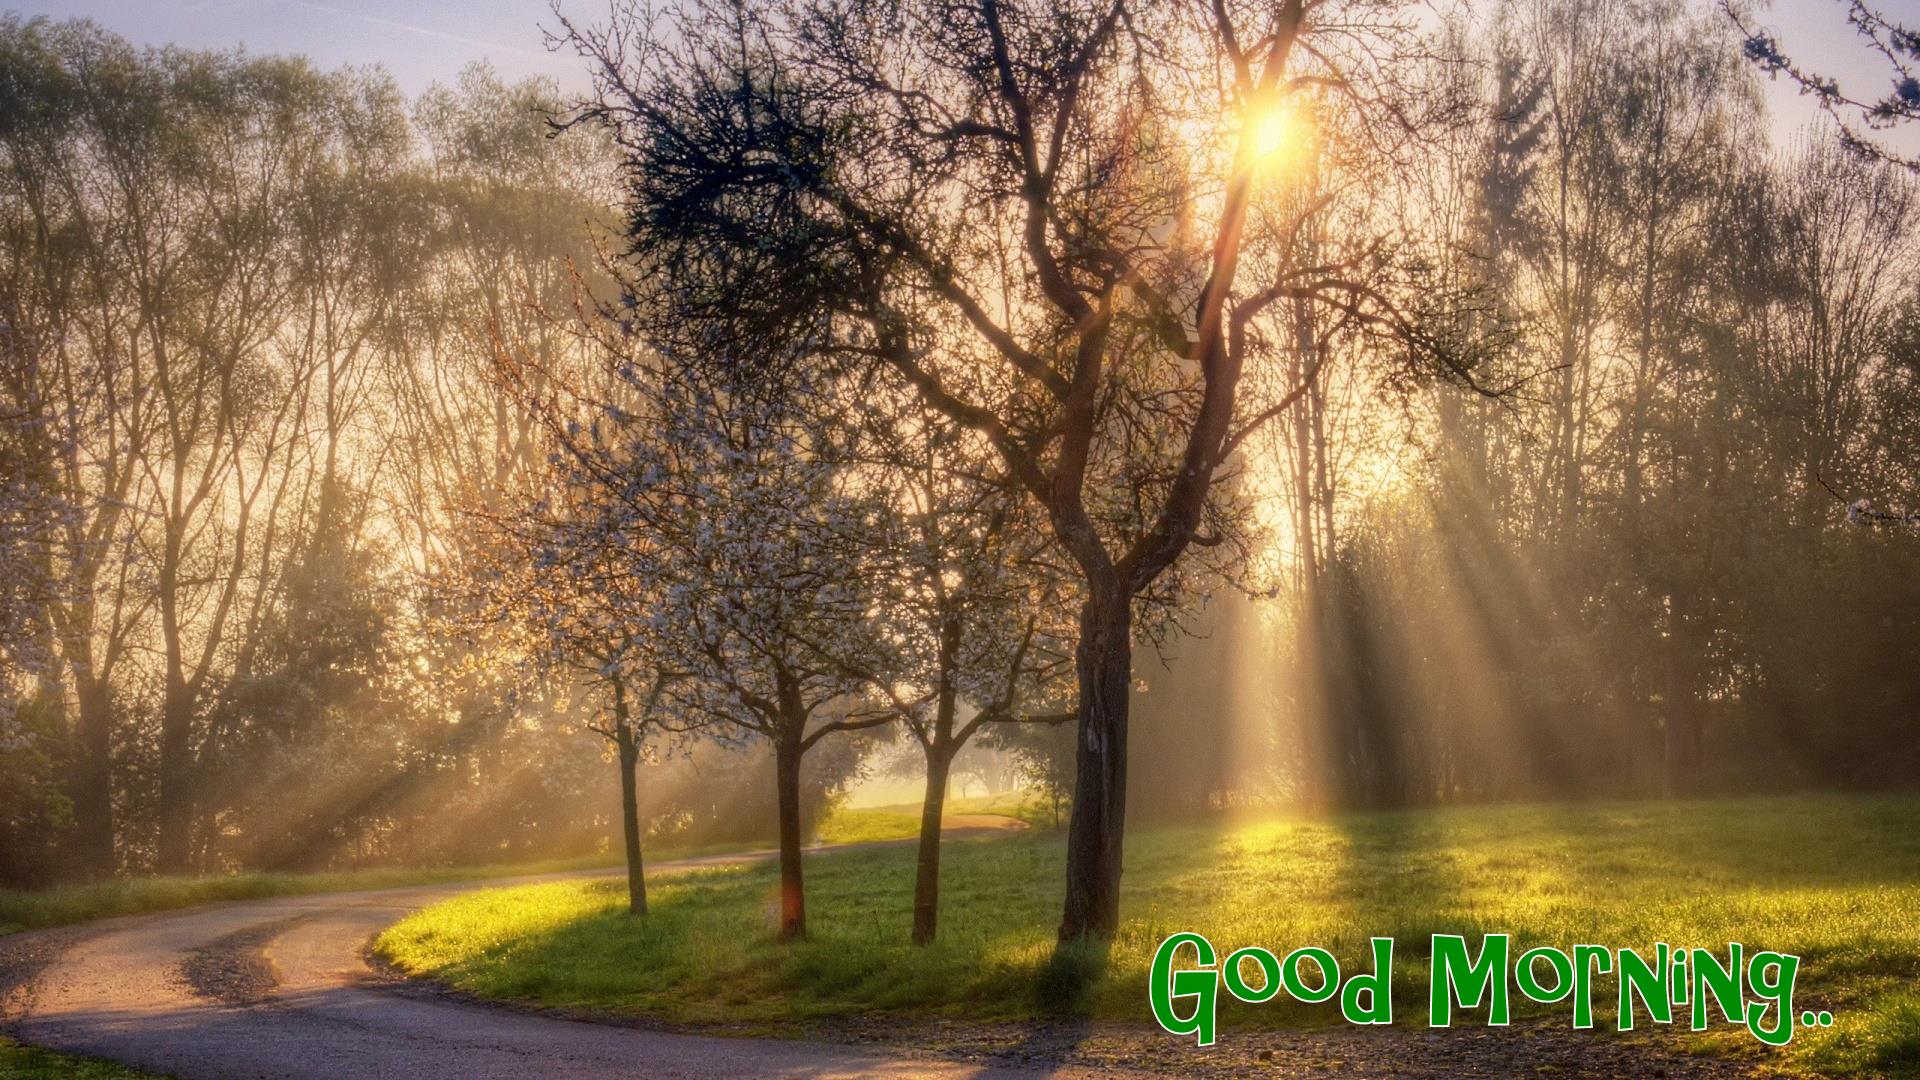  wallpapers Every morning is a gift of life a positive start will